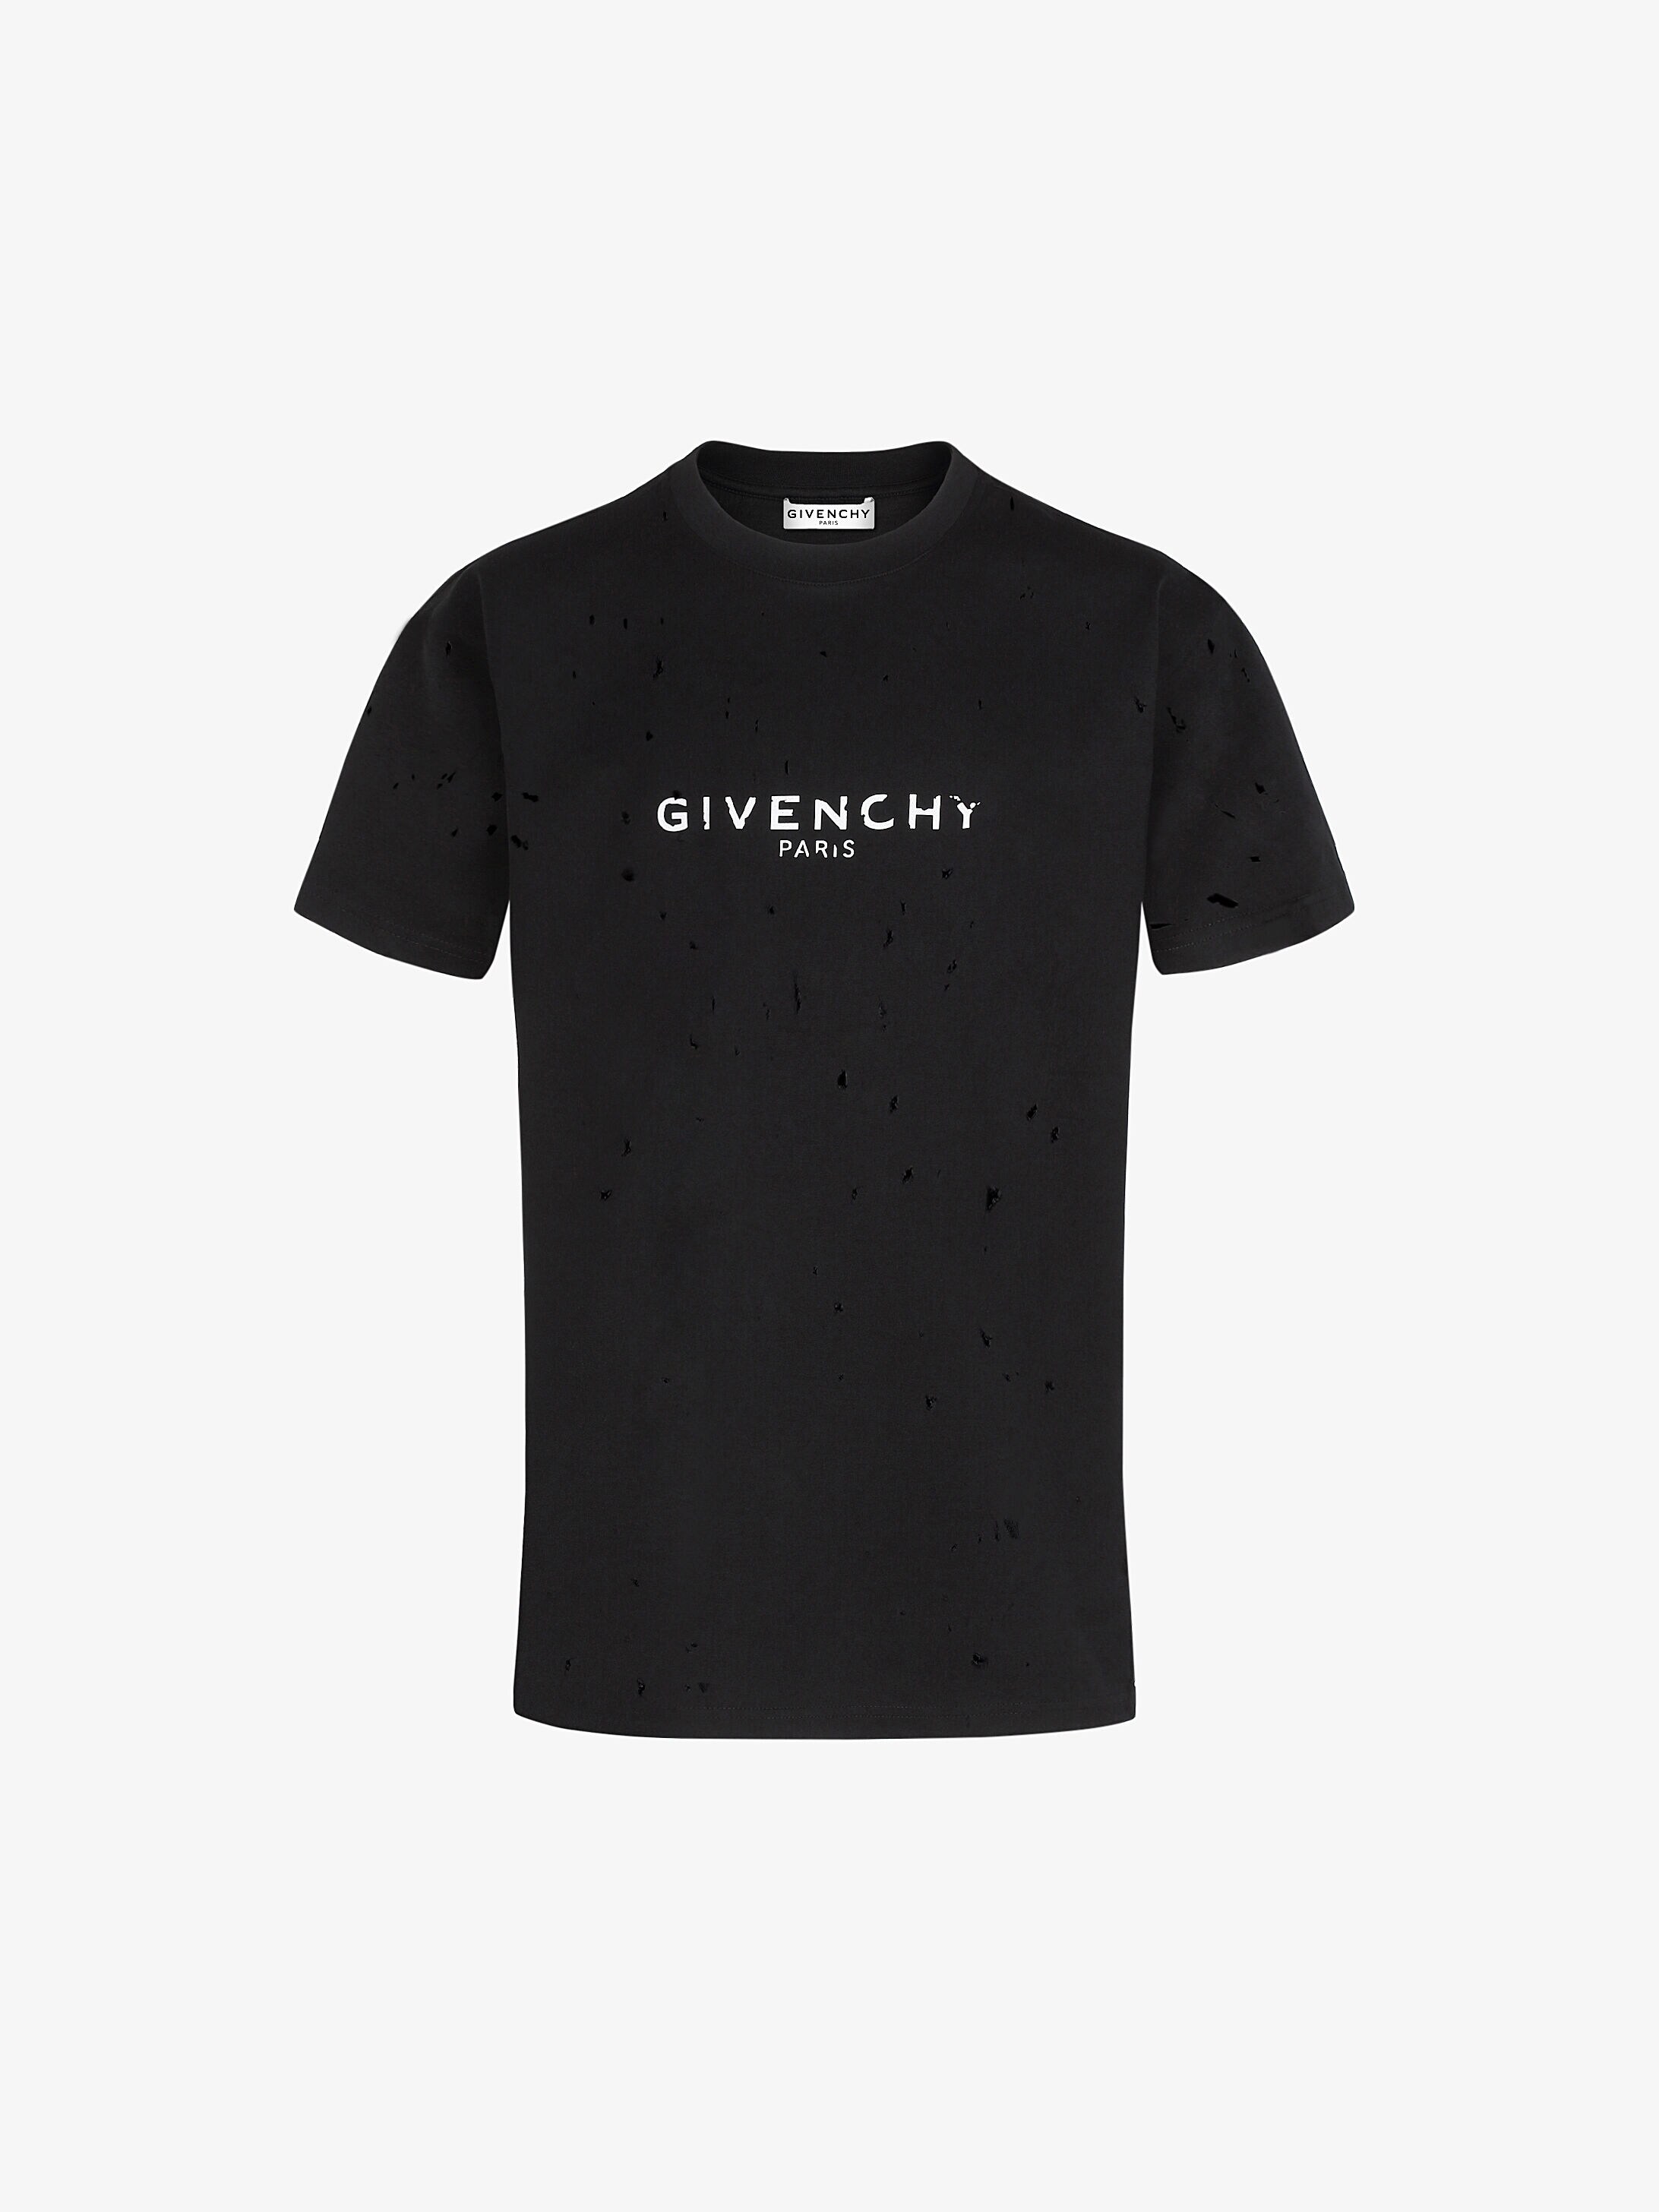 givenchy ripped hoodie